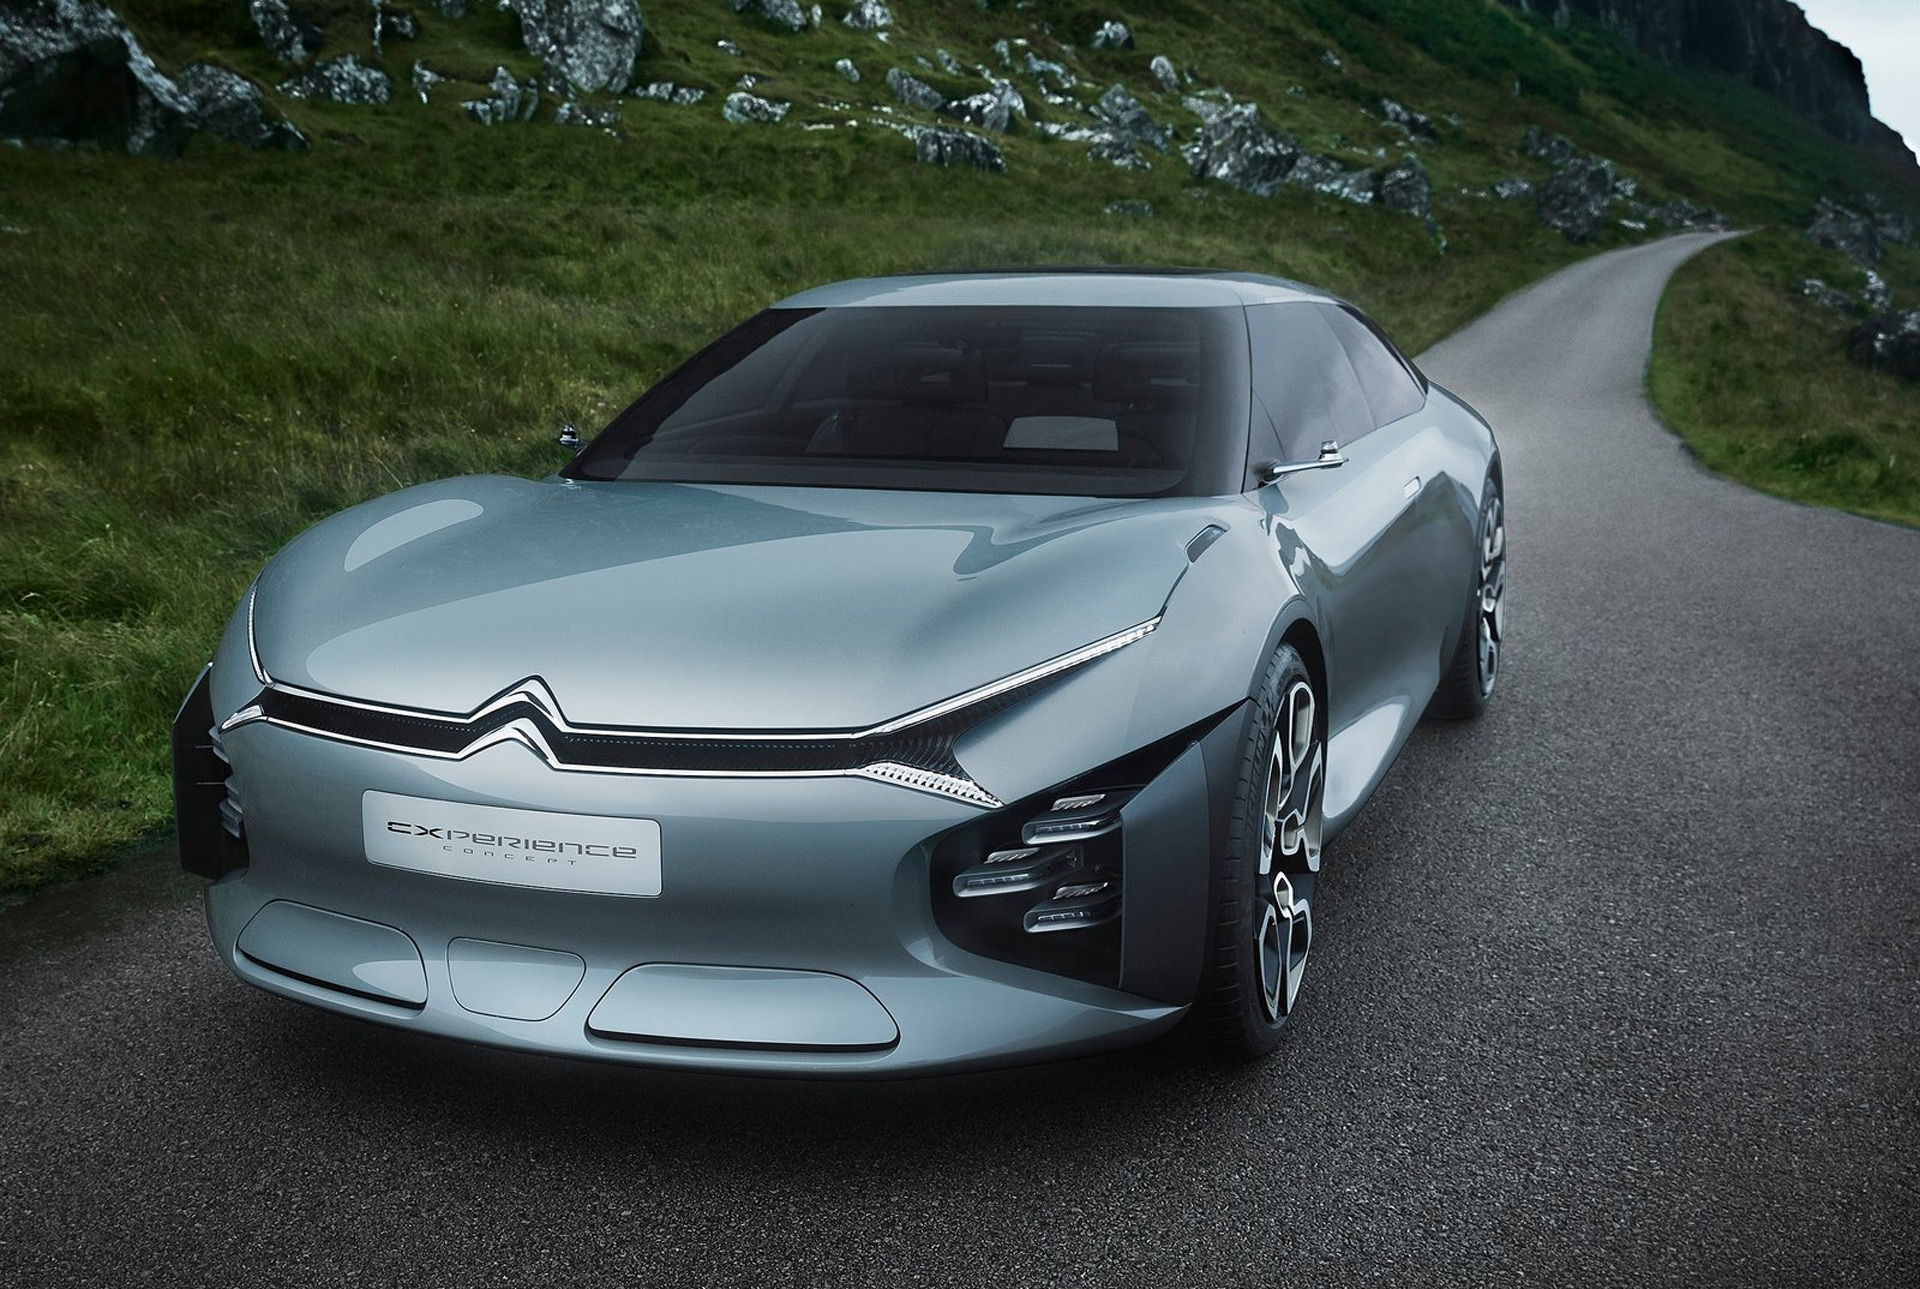 Citroën To Fill C6 Void With New Flagship Sedan